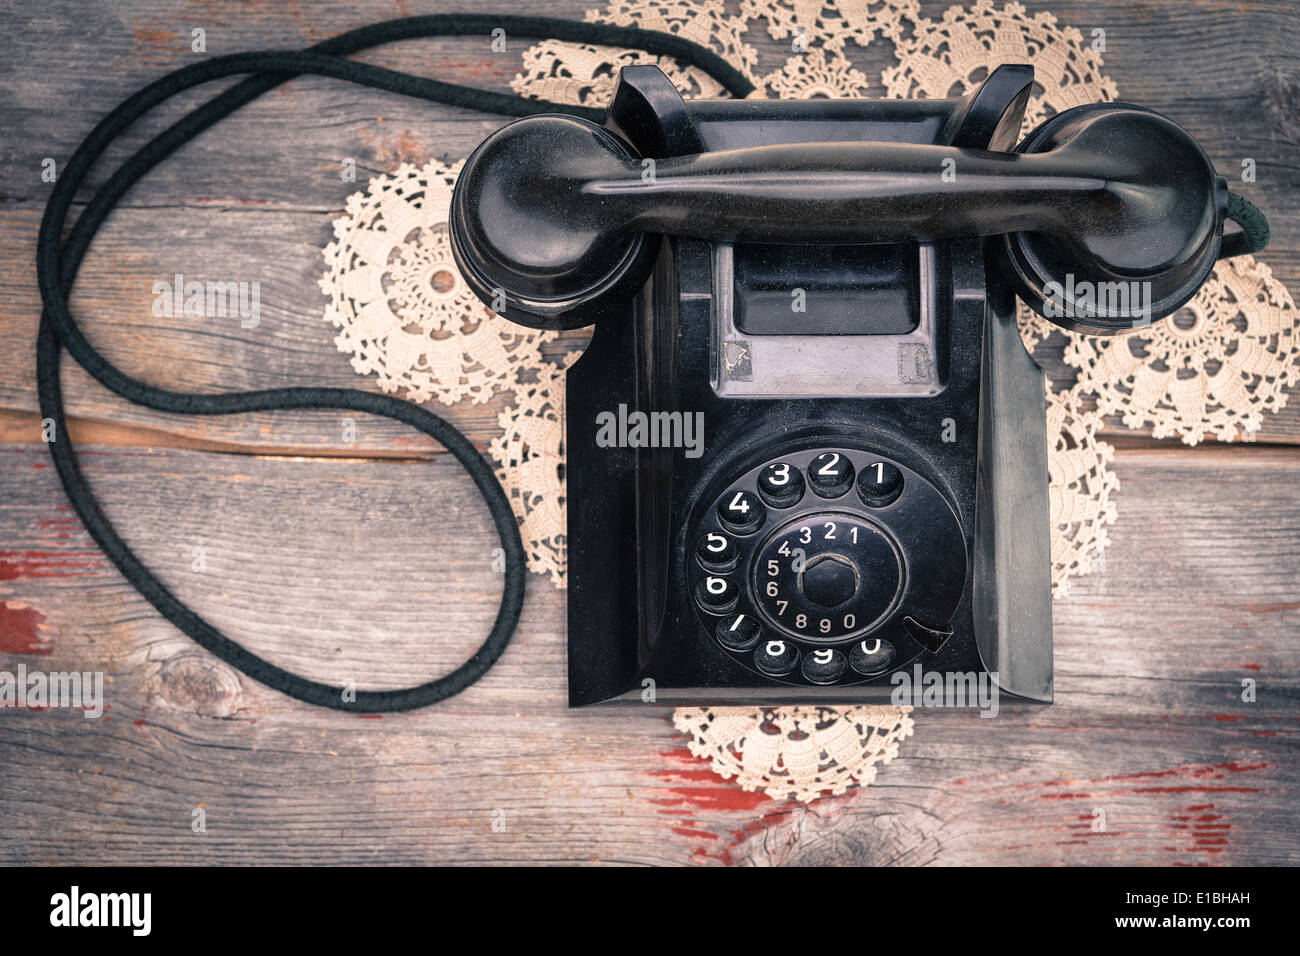 View from above of a black old-fashioned rotary telephone instrument on a crocheted doily on a weathered wooden table top Stock Photo